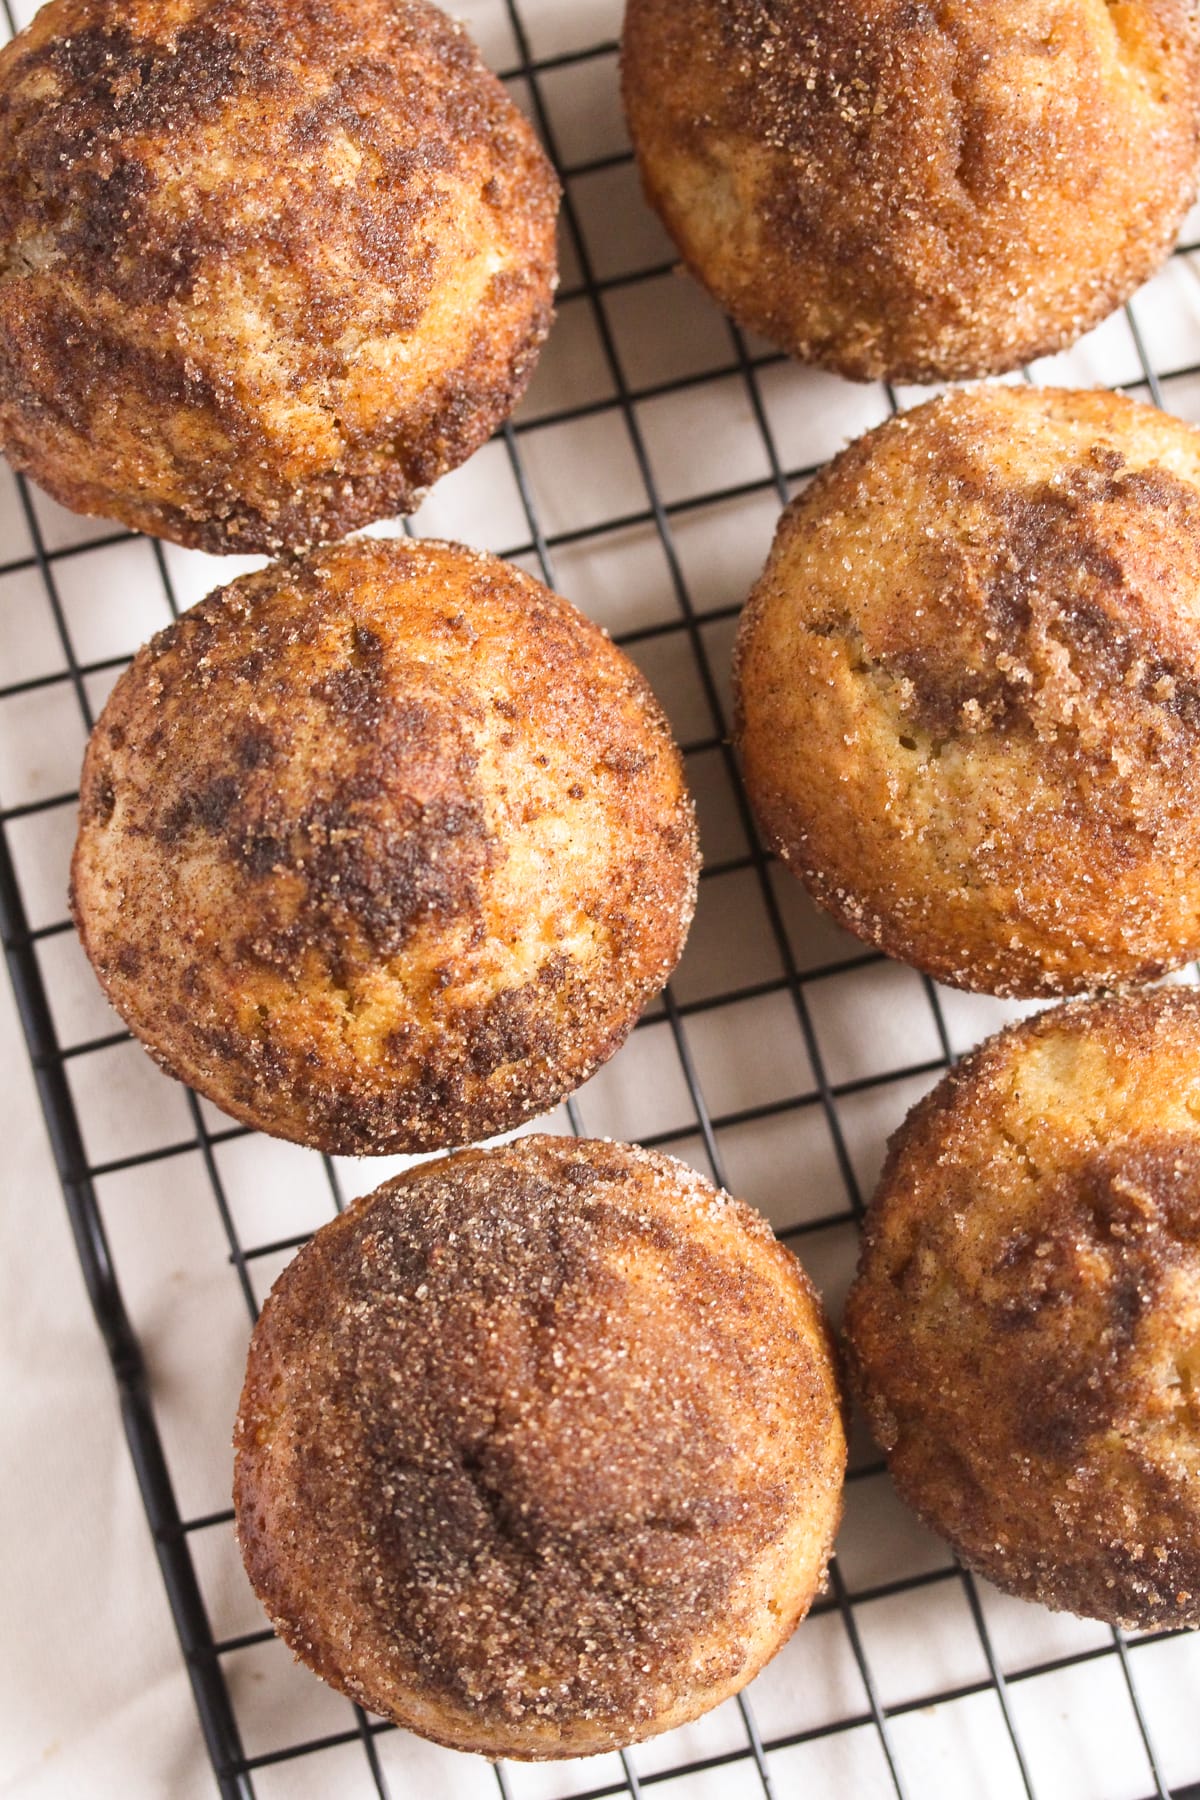 six cinnamon apple donut muffins cooling on a wire rack.